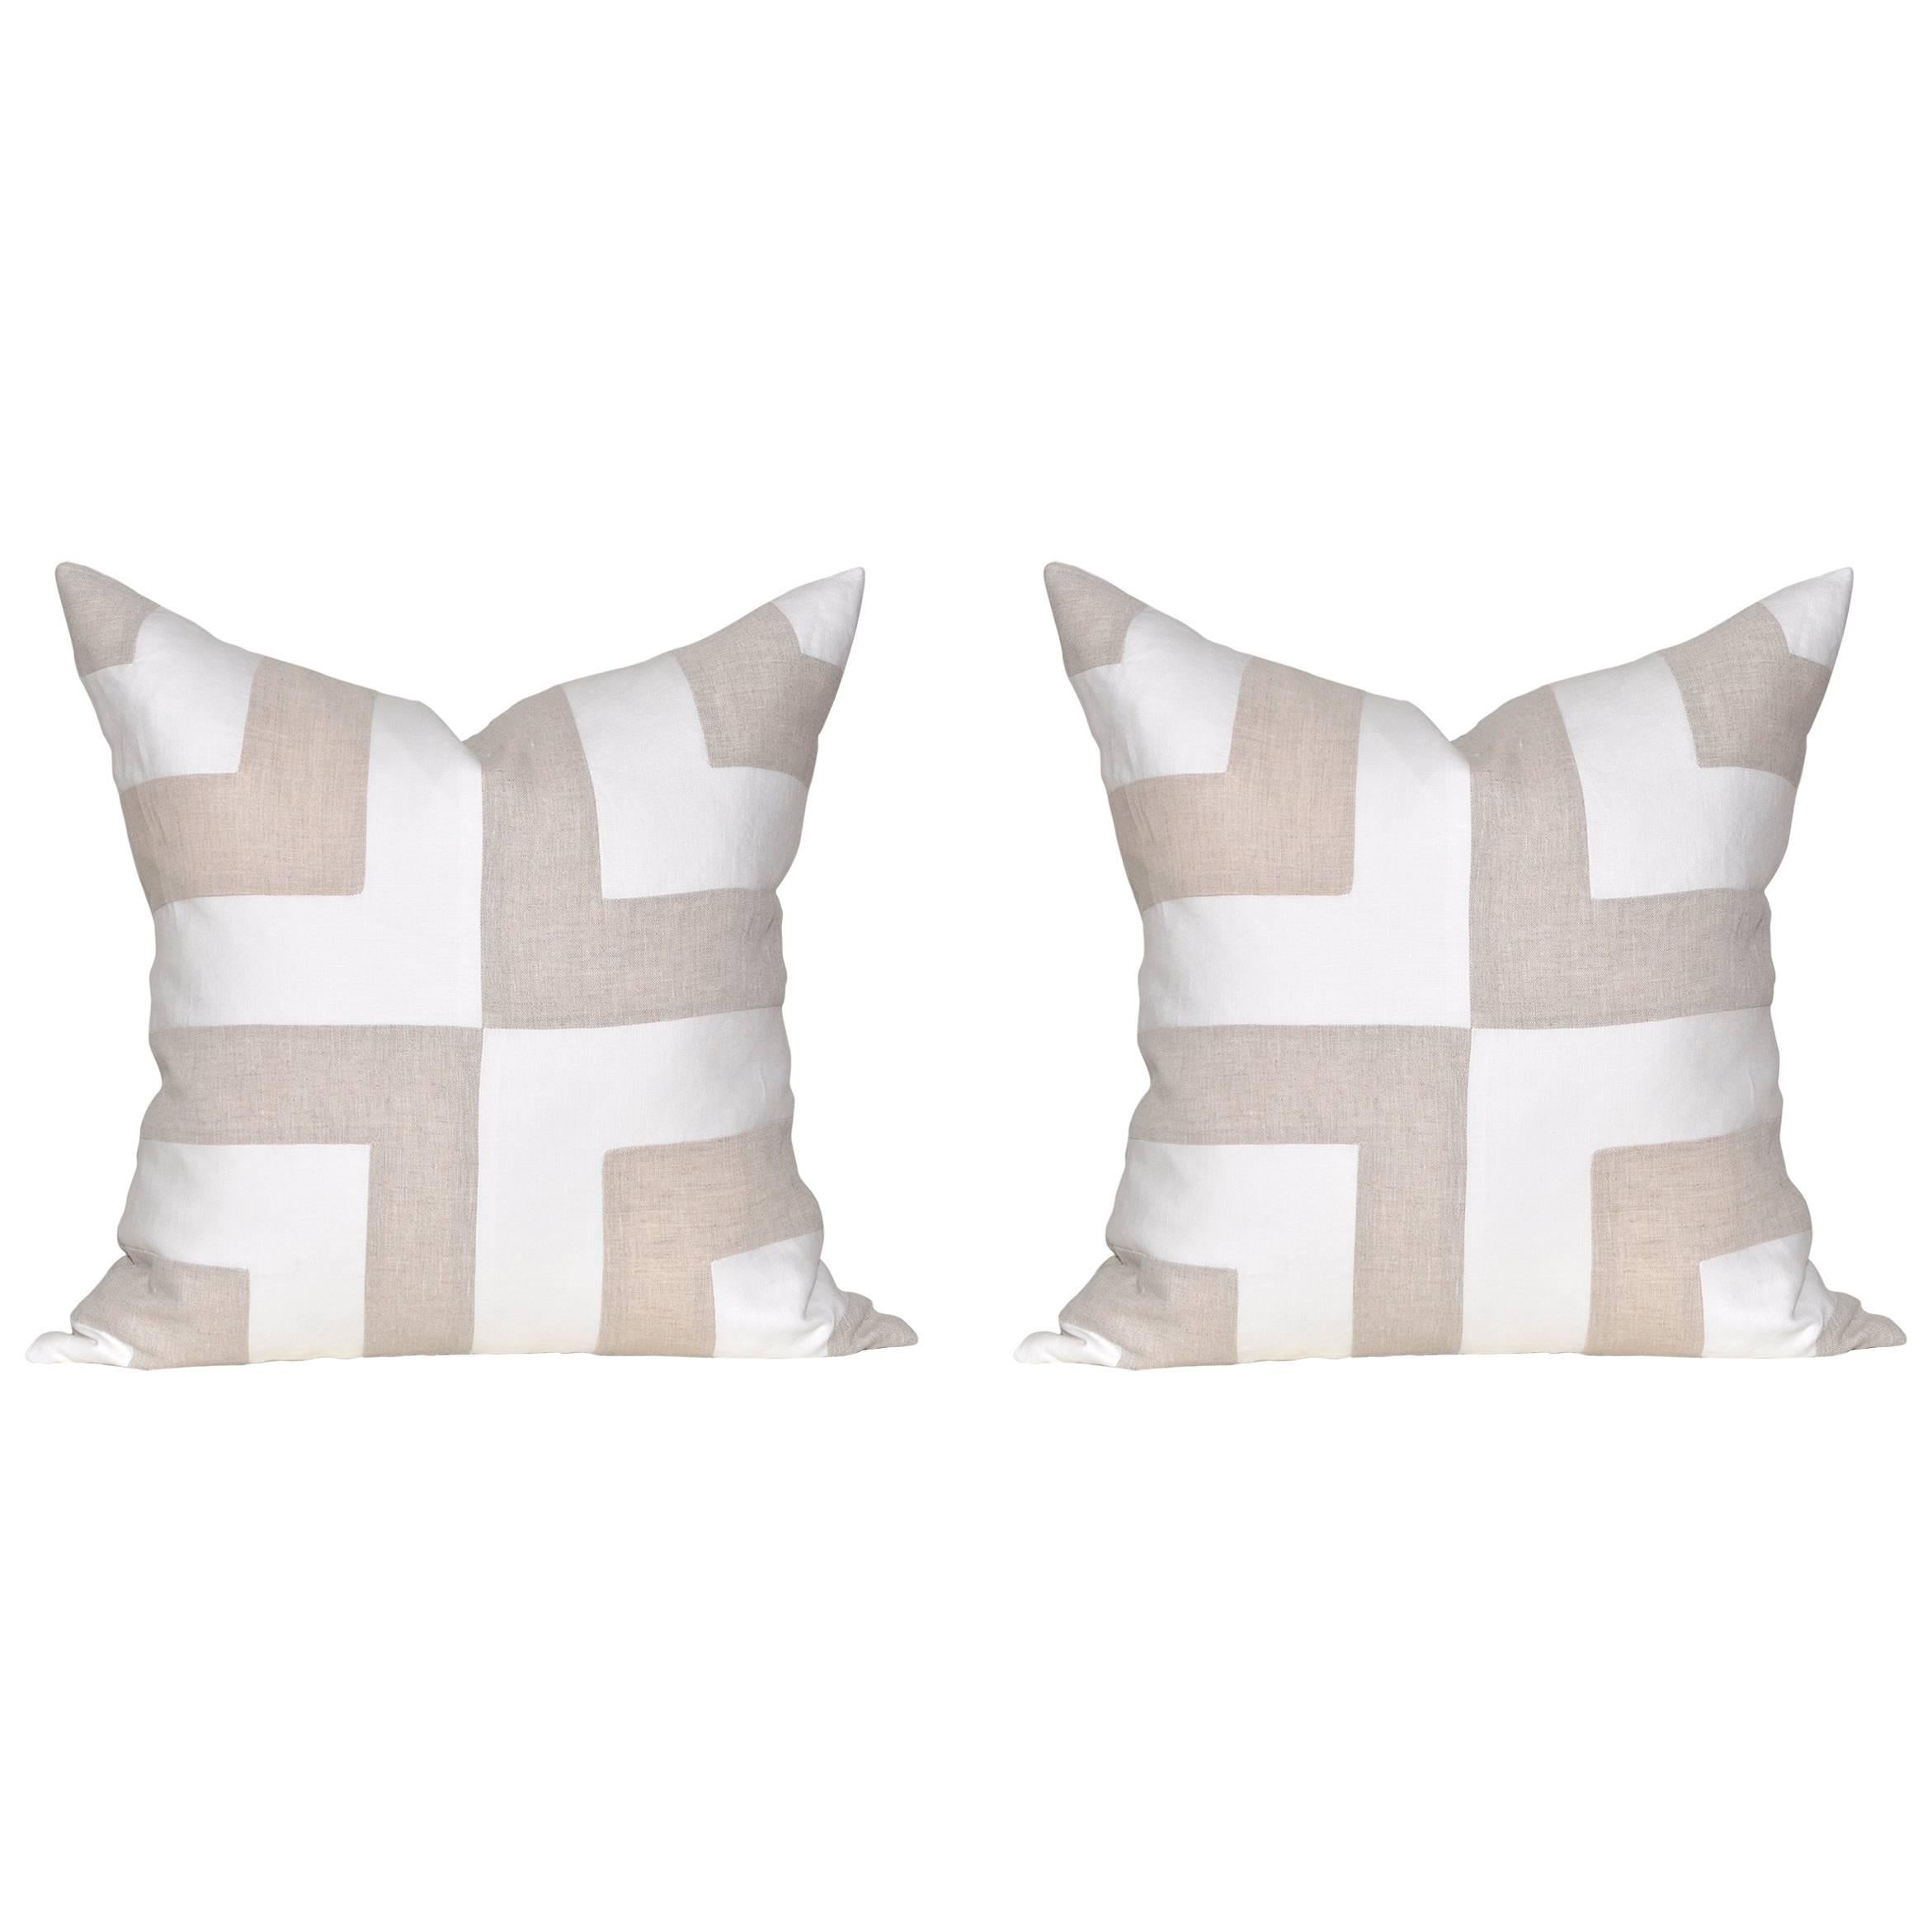 Pair of Large Contemporary Irish Linen Pillows Cushions White Natural Patchwork For Sale